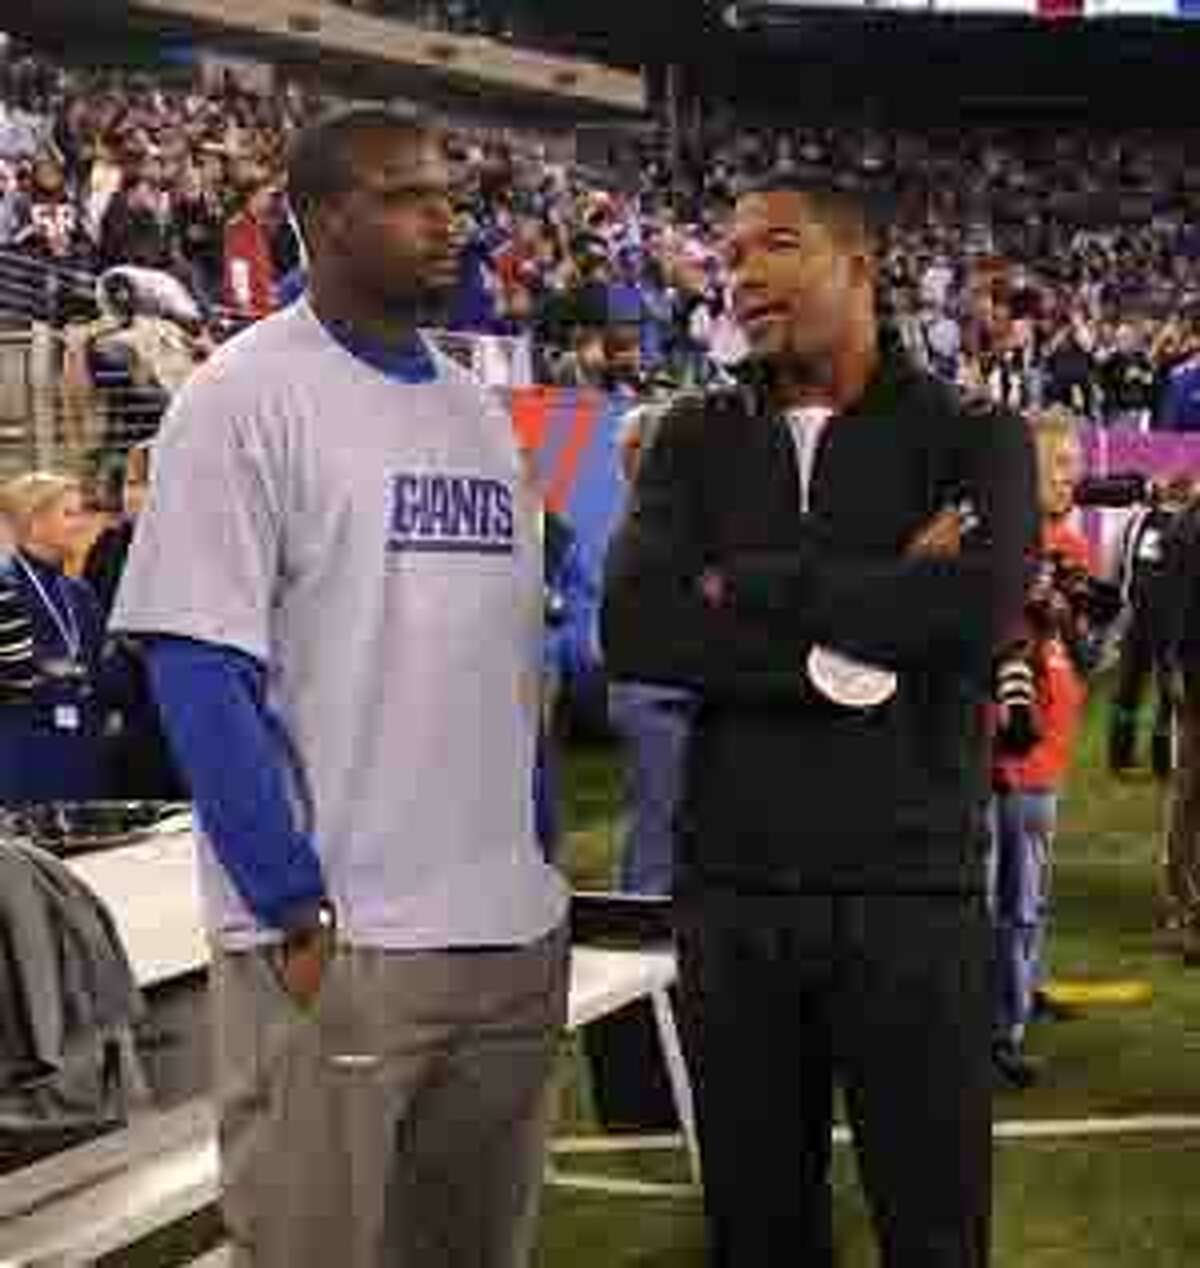 Wait for Giants jersey retirement a sore spot for Michael Strahan